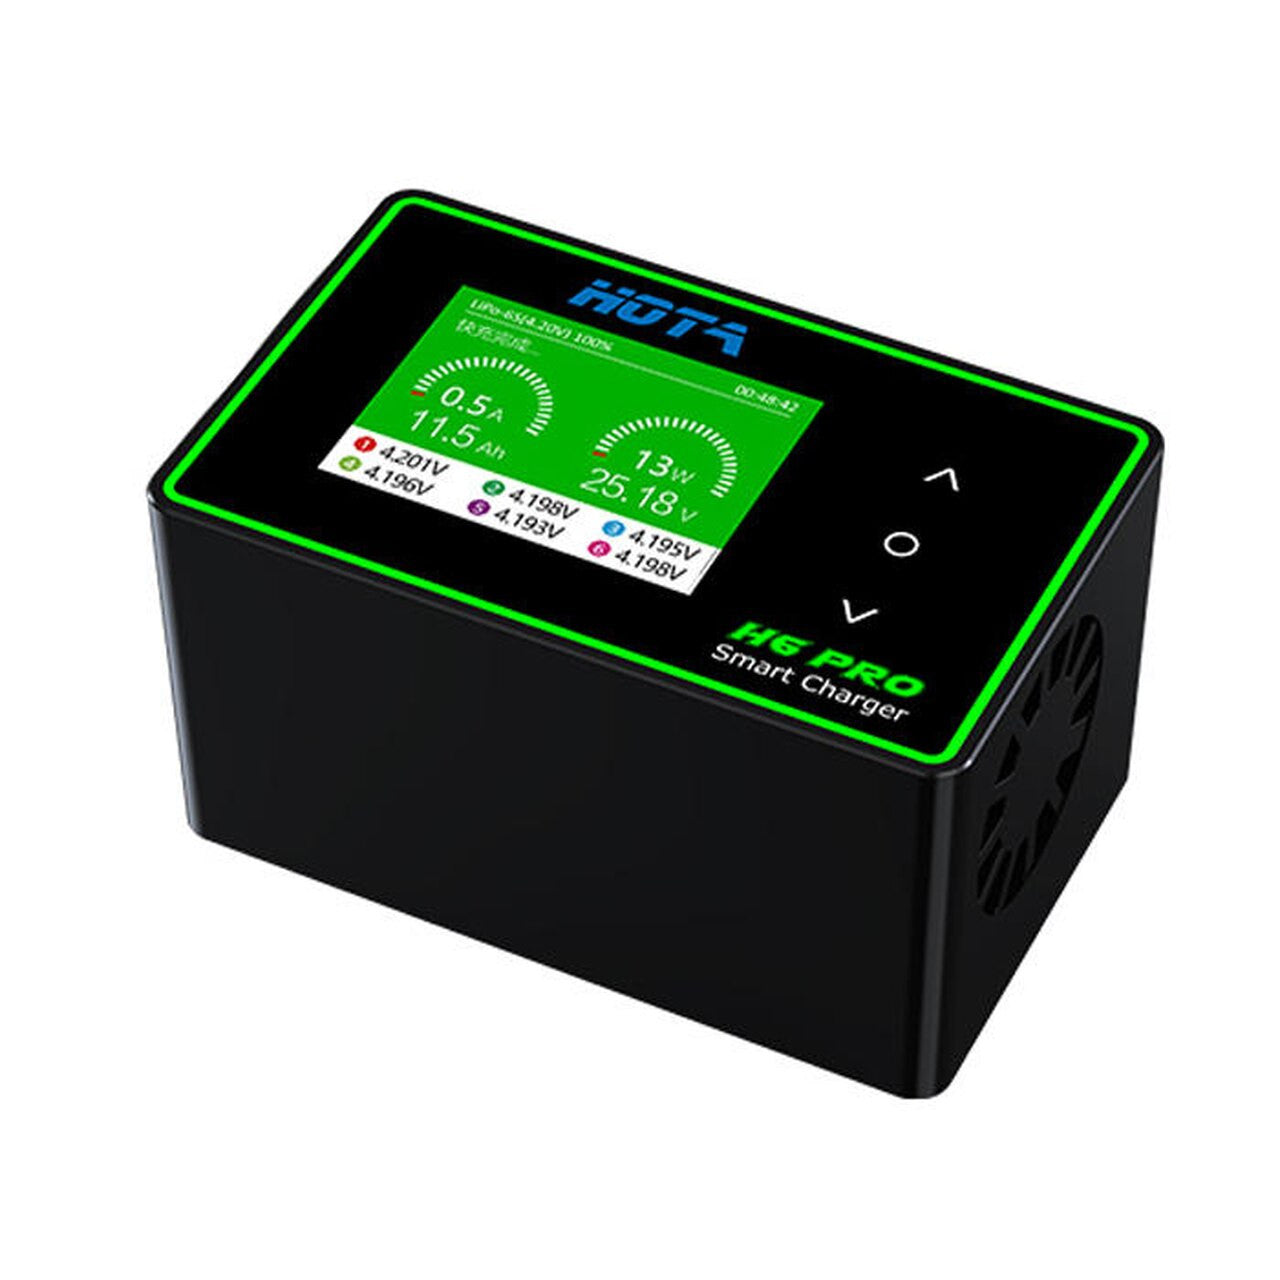 HOTA H6 Pro Smart Lipo NiMH LiHV Lilon Battery Charger Discharger AC 200W DC700W